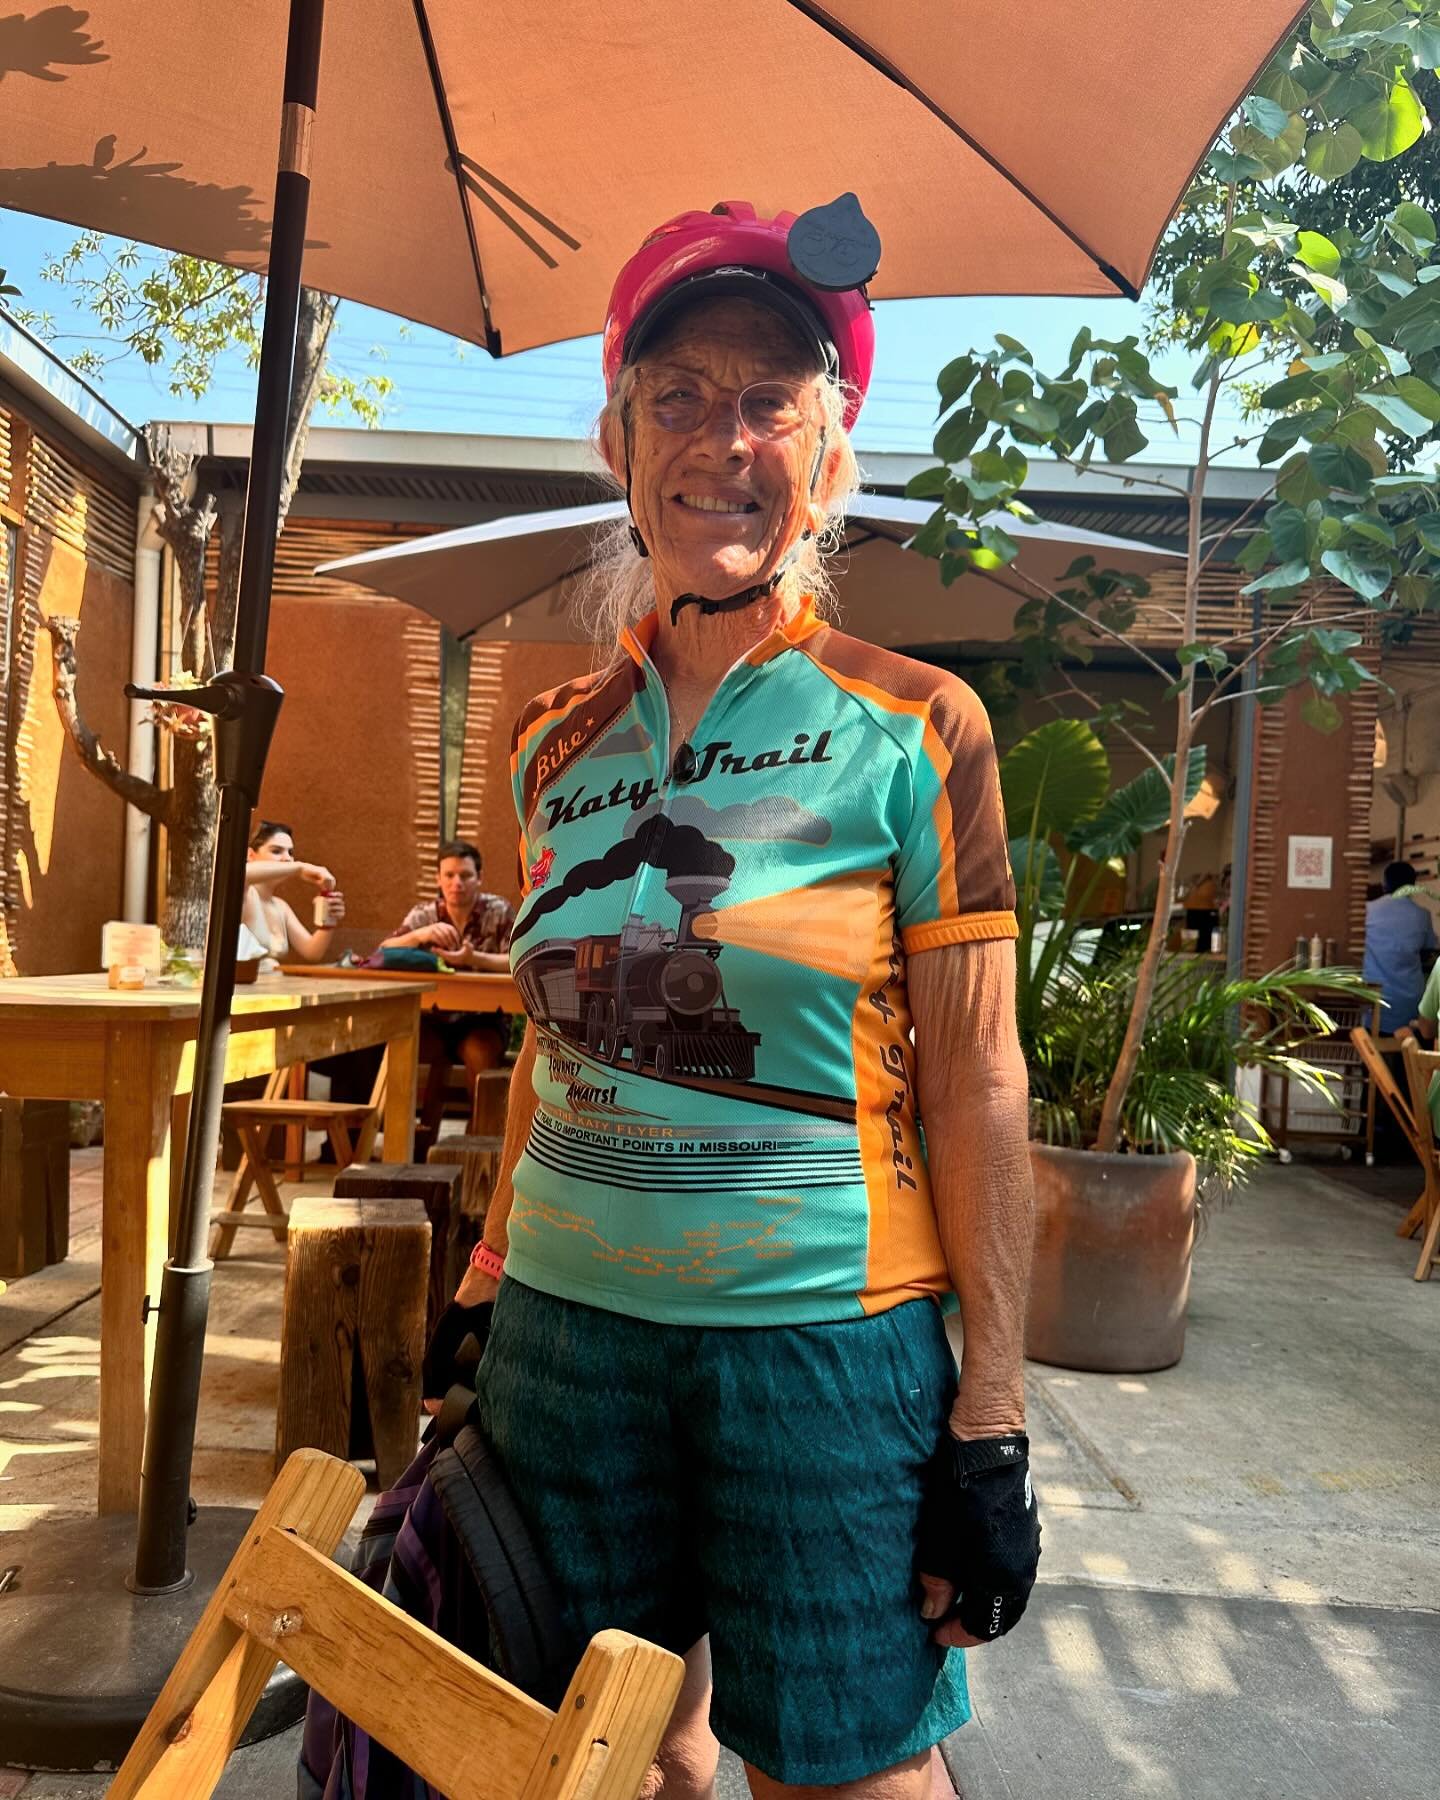 Met up with a legend @panconmadre who rides her bike in from out of town.  Awesome fitness.  I&rsquo;m just returning to being able to walk between bakeries!  Onward! As they say.